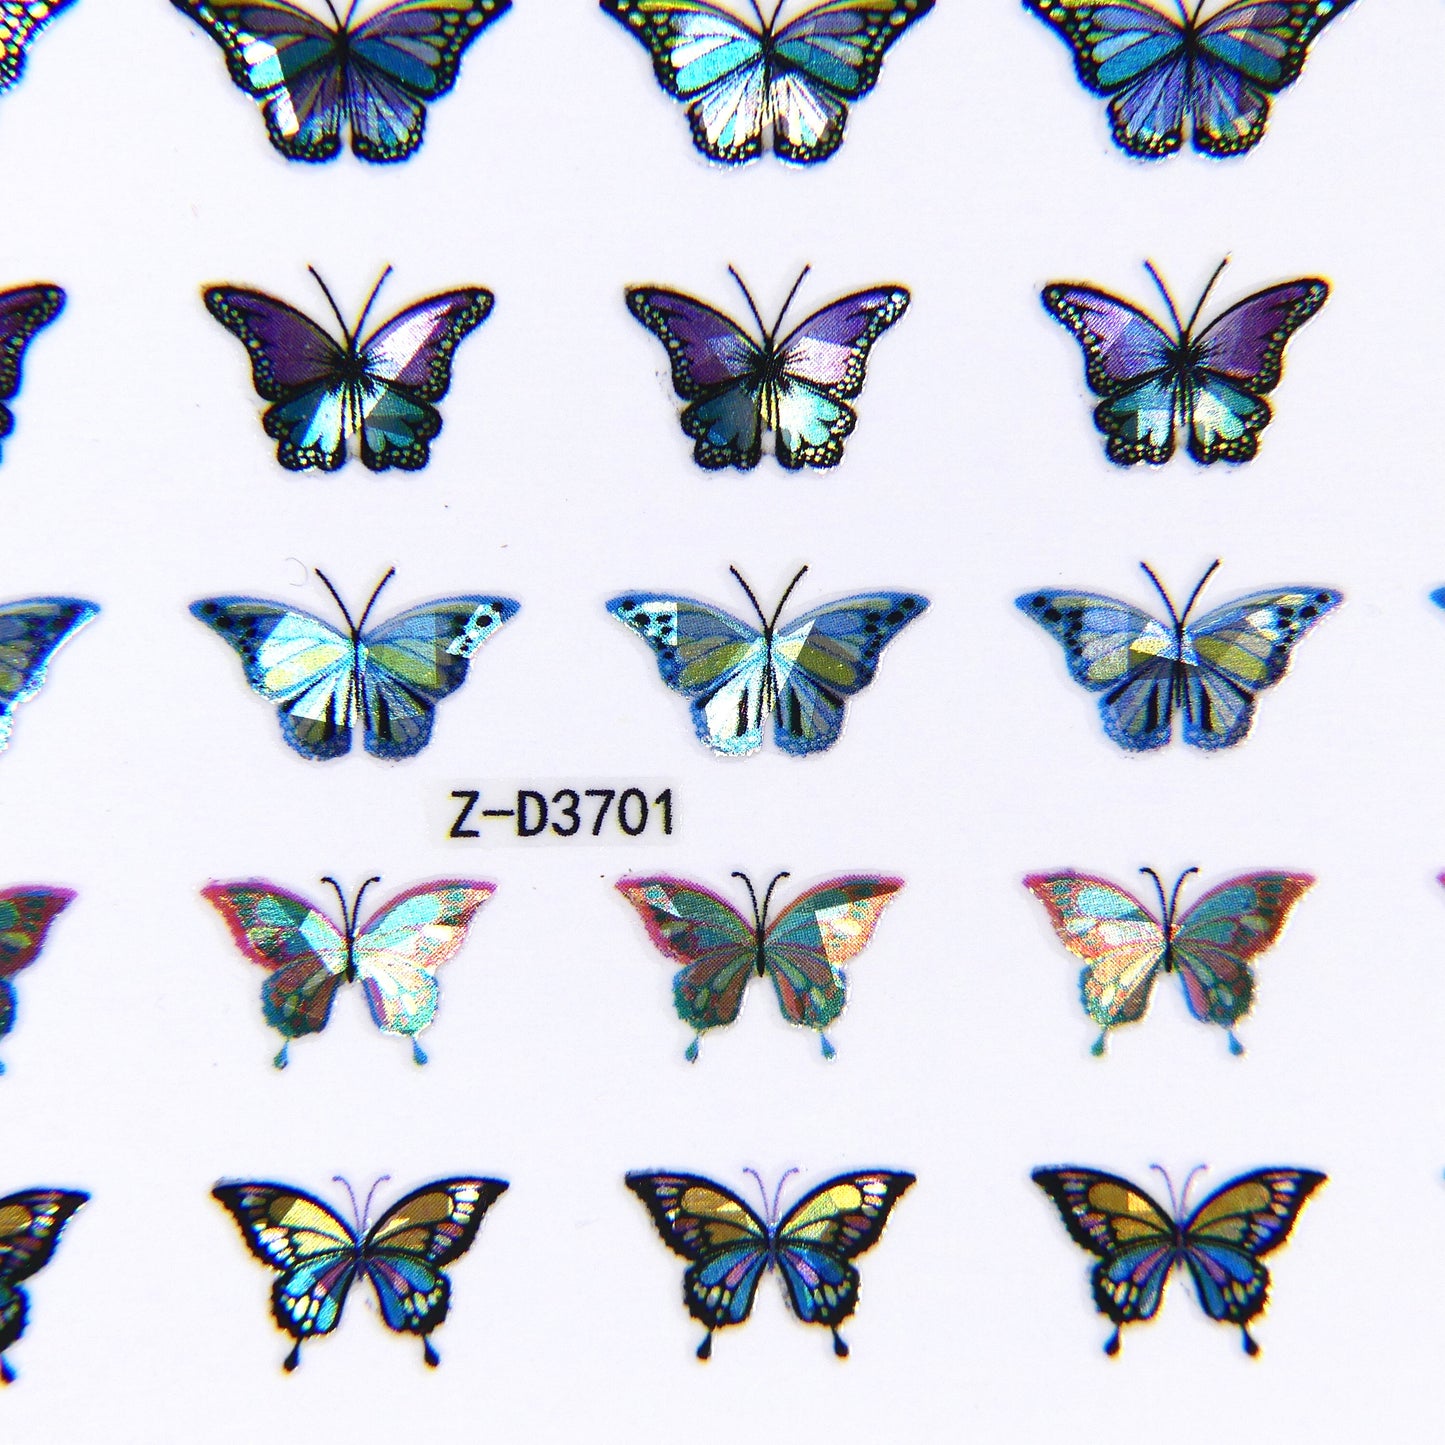 ACRYLIC MILK CARTON DECAL // Layered Holographic Butterflies with